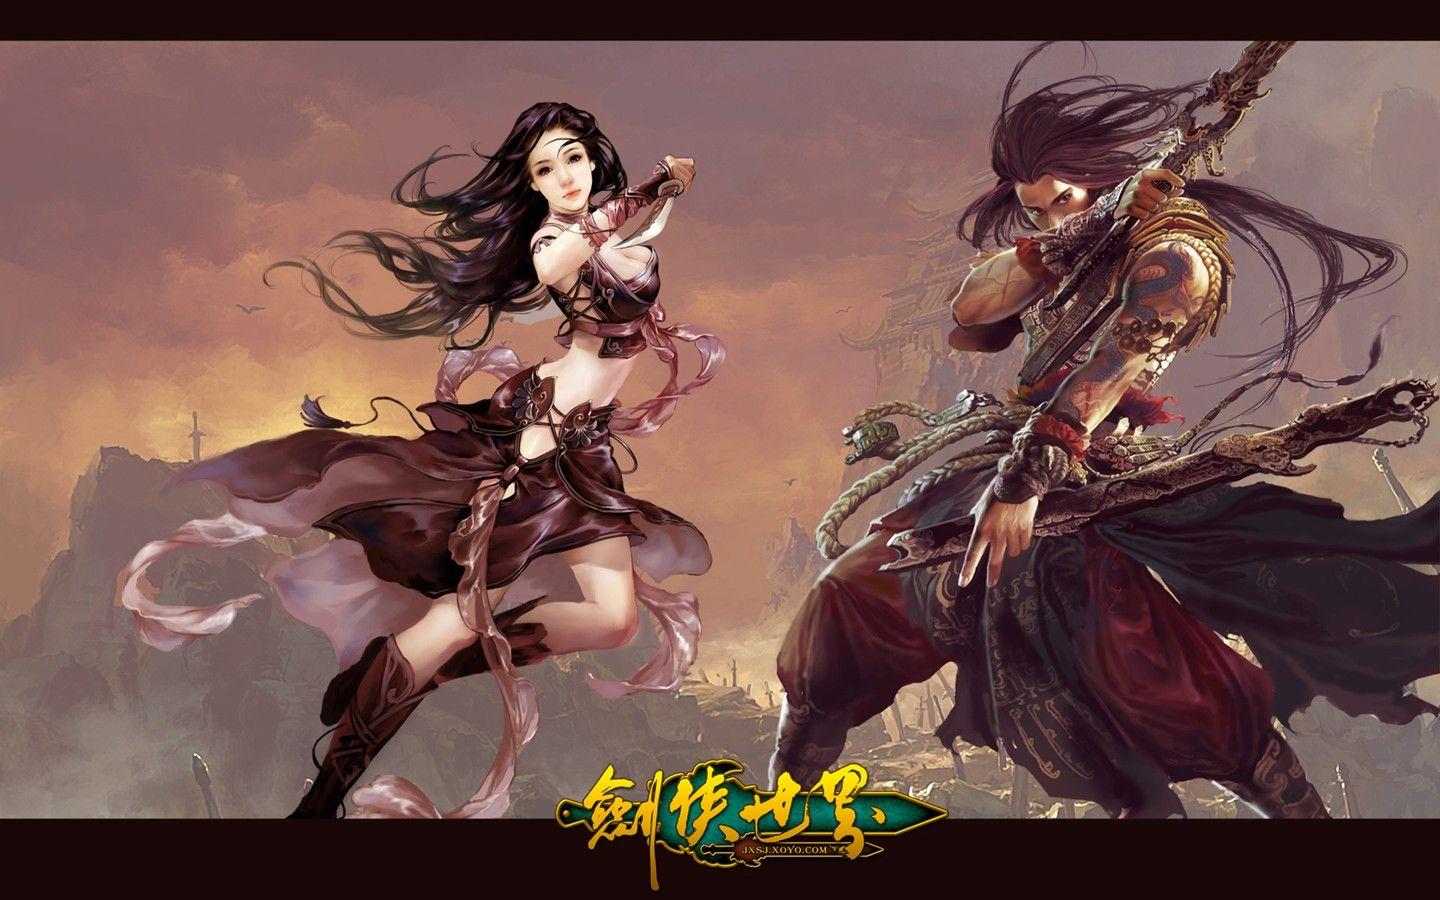 D of the swordsman in the world martial arts online game wallpaper